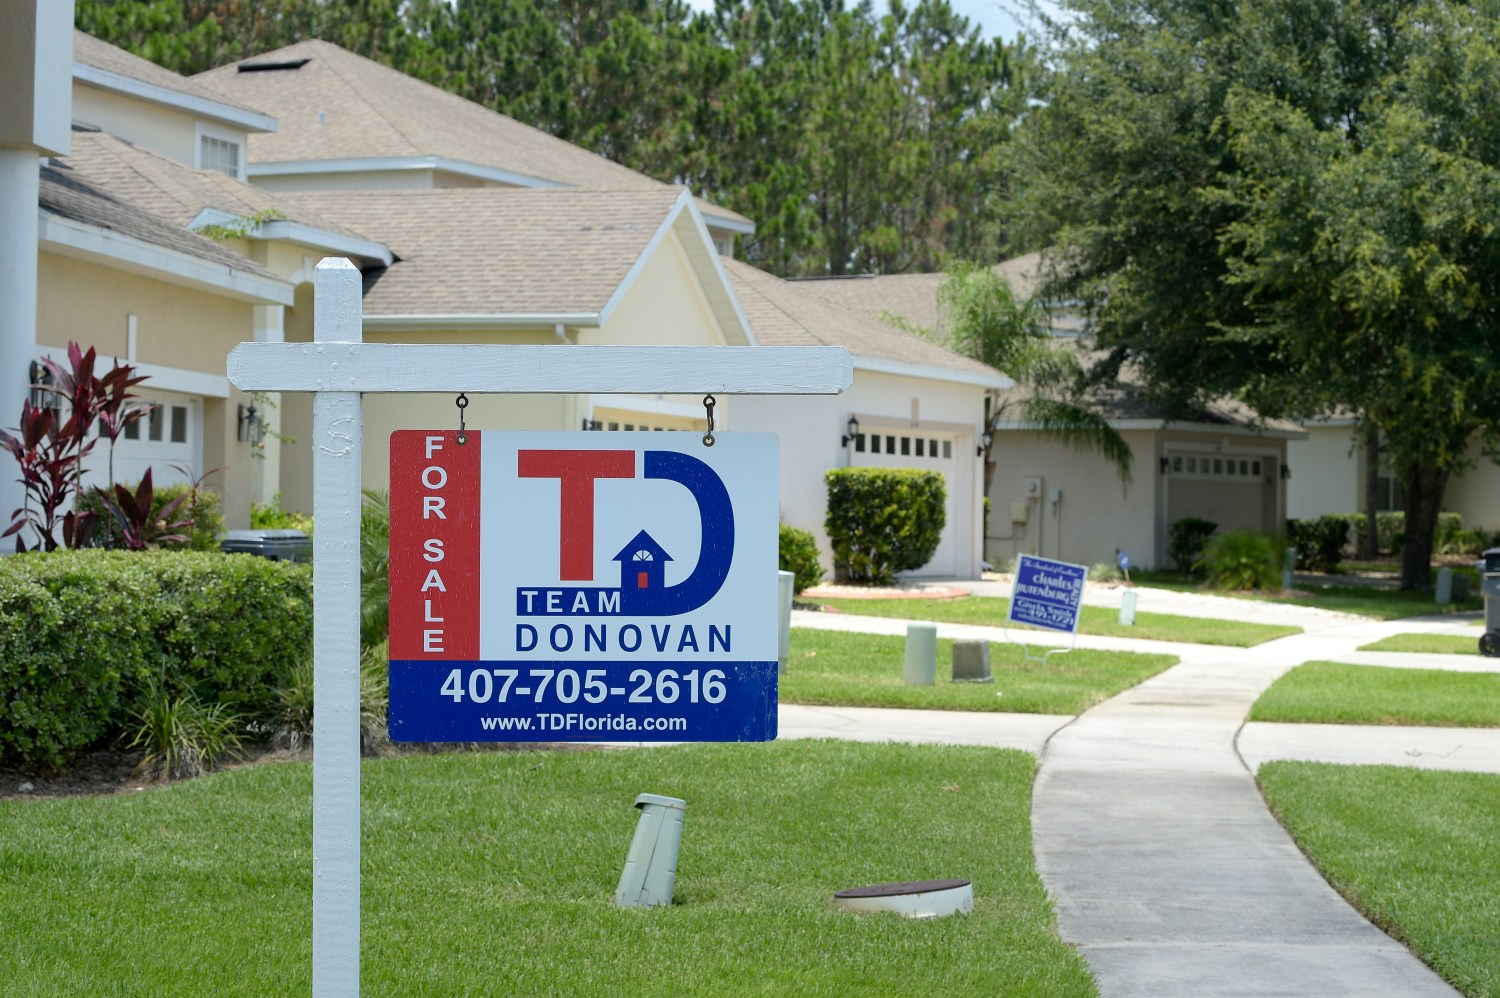 For Sale signs stand in front of houses in a neighborhood where many British people have purchased homes in Davenport, Florida, U.S., June 29, 2016.  Photo taken June 29, 2016. REUTERS/Phelan Ebenhack - TM3EC6U0SV201